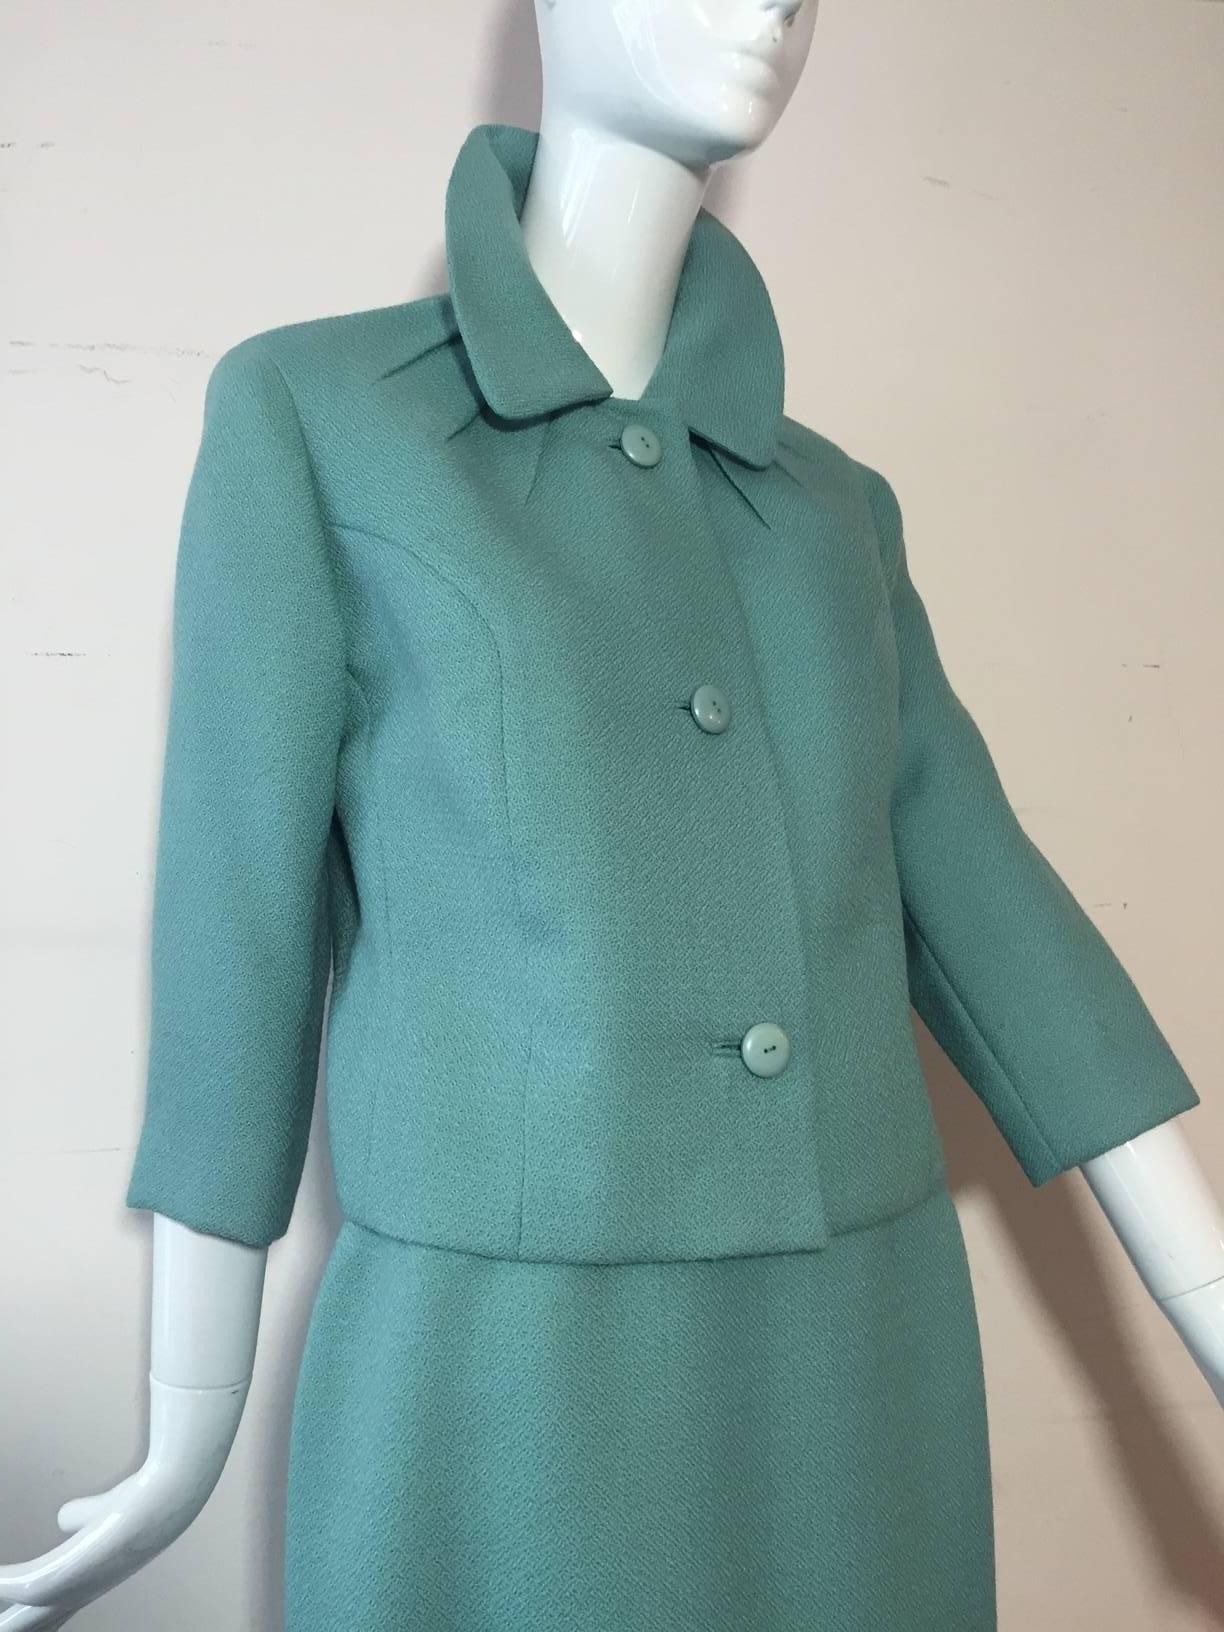 A gorgeous 1950s Jean Lanvin - Castillo turquoise wool skirt suit:  Completely lined in taupe satin. A straight skirt and boxy cut jacket with button closures, princess seaming and featured darting detail at neckline. Originally sold at I. Magnin. 